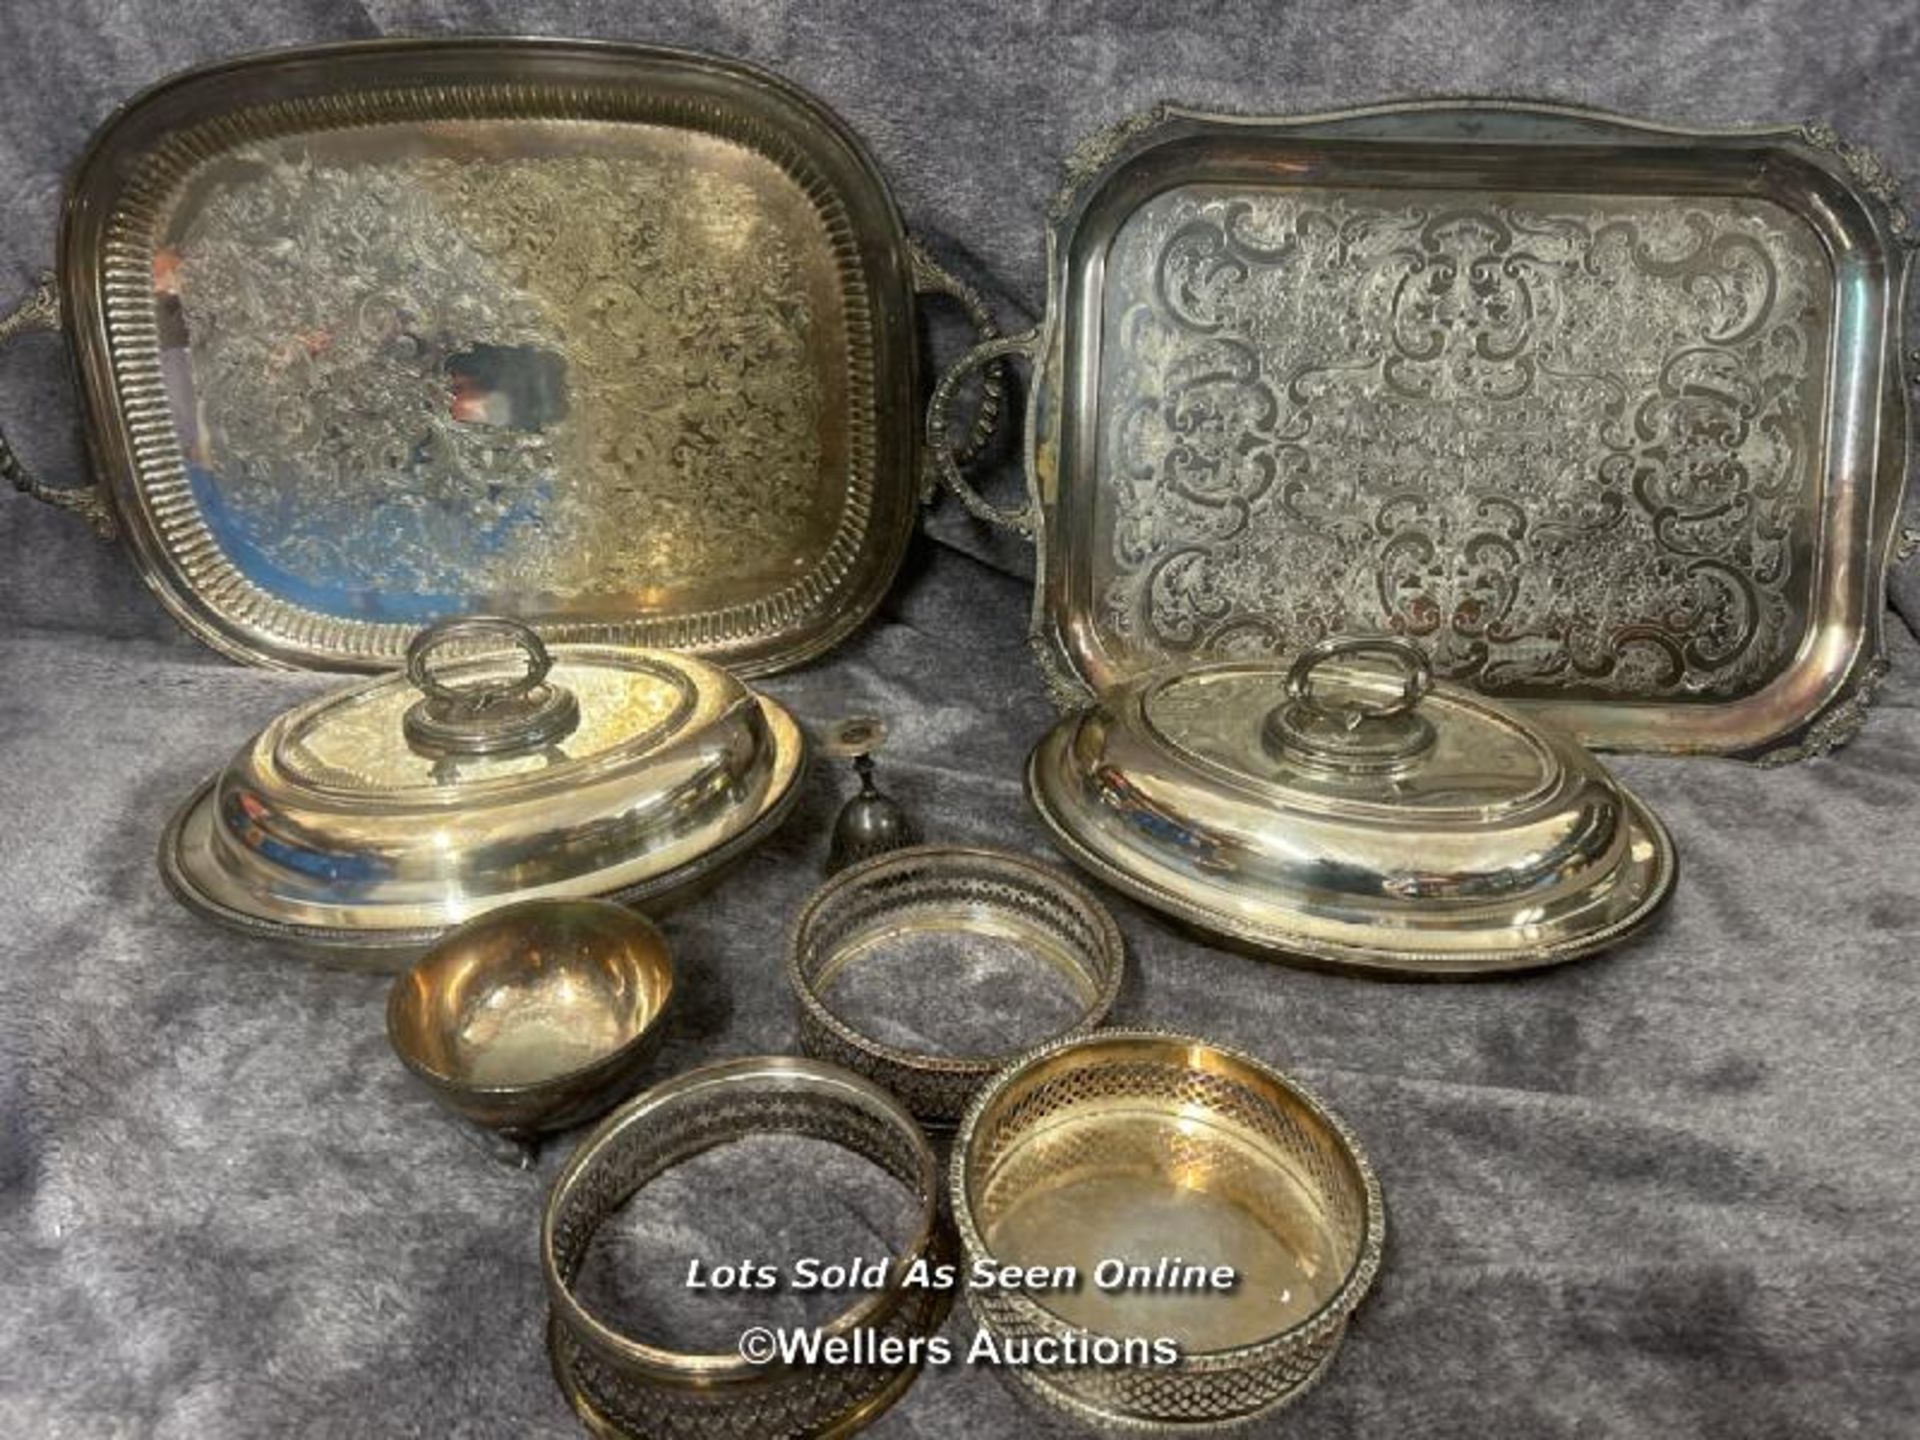 Assorted metalware including two large trays and serving dishes / AN34